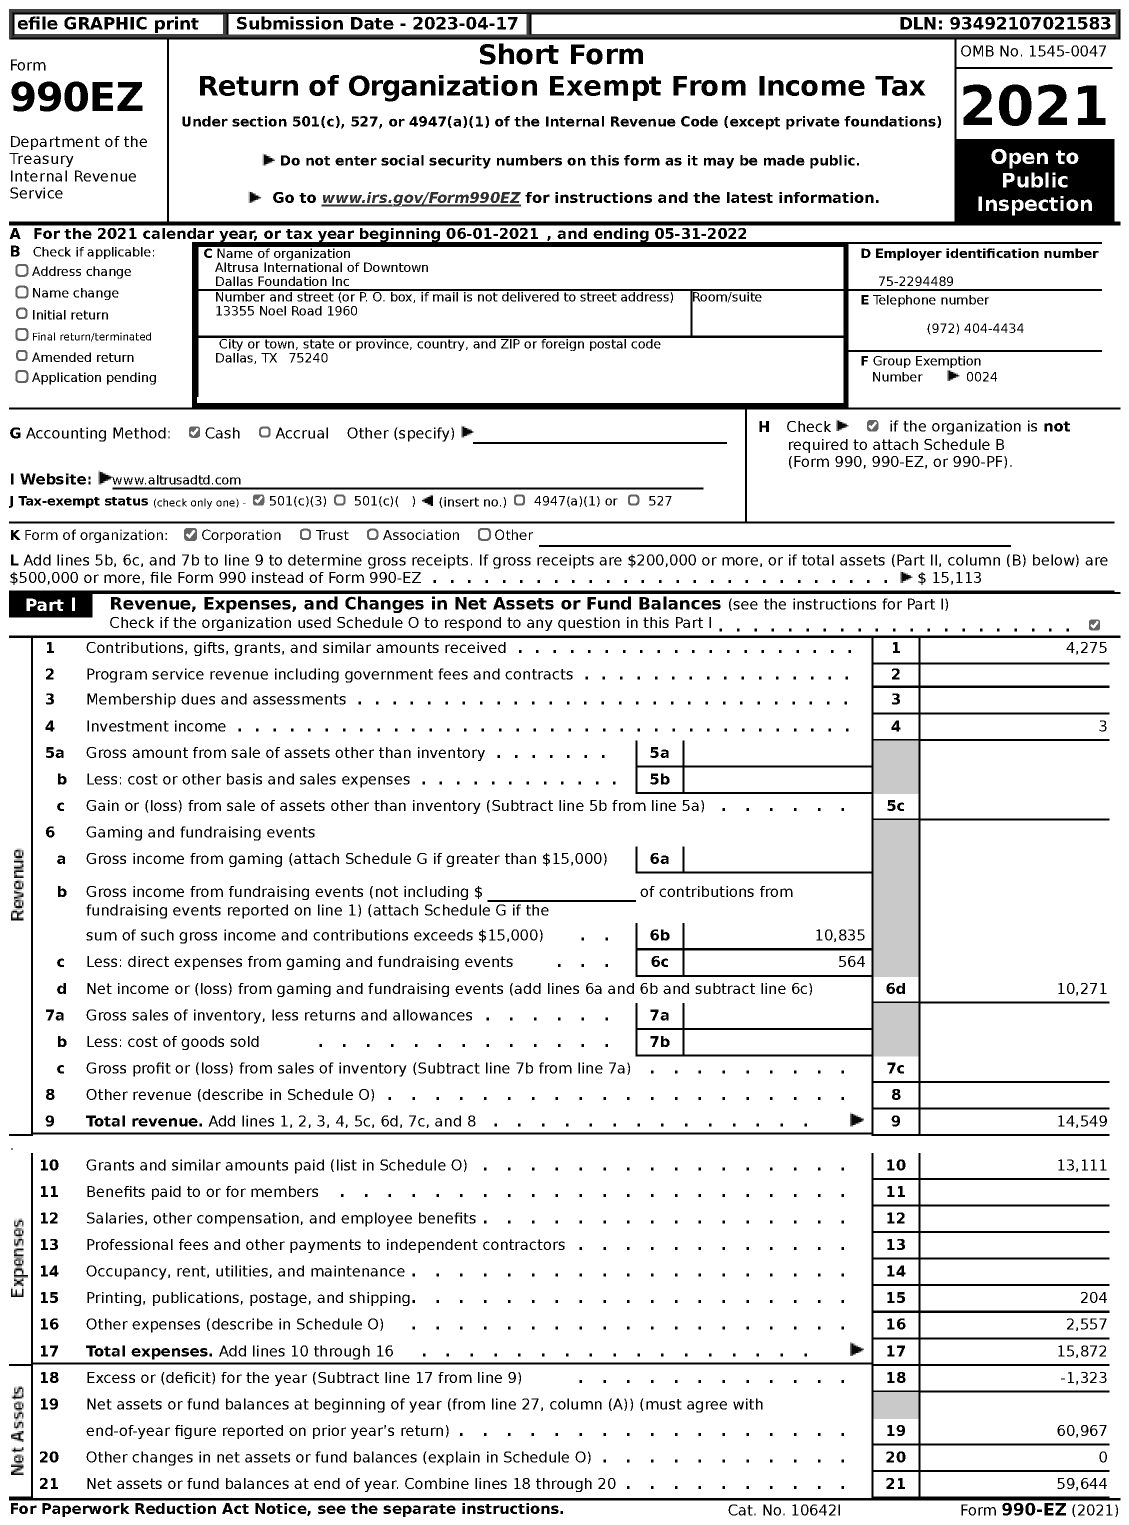 Image of first page of 2021 Form 990EZ for Altrusa International of Downtown Dallas Foundation